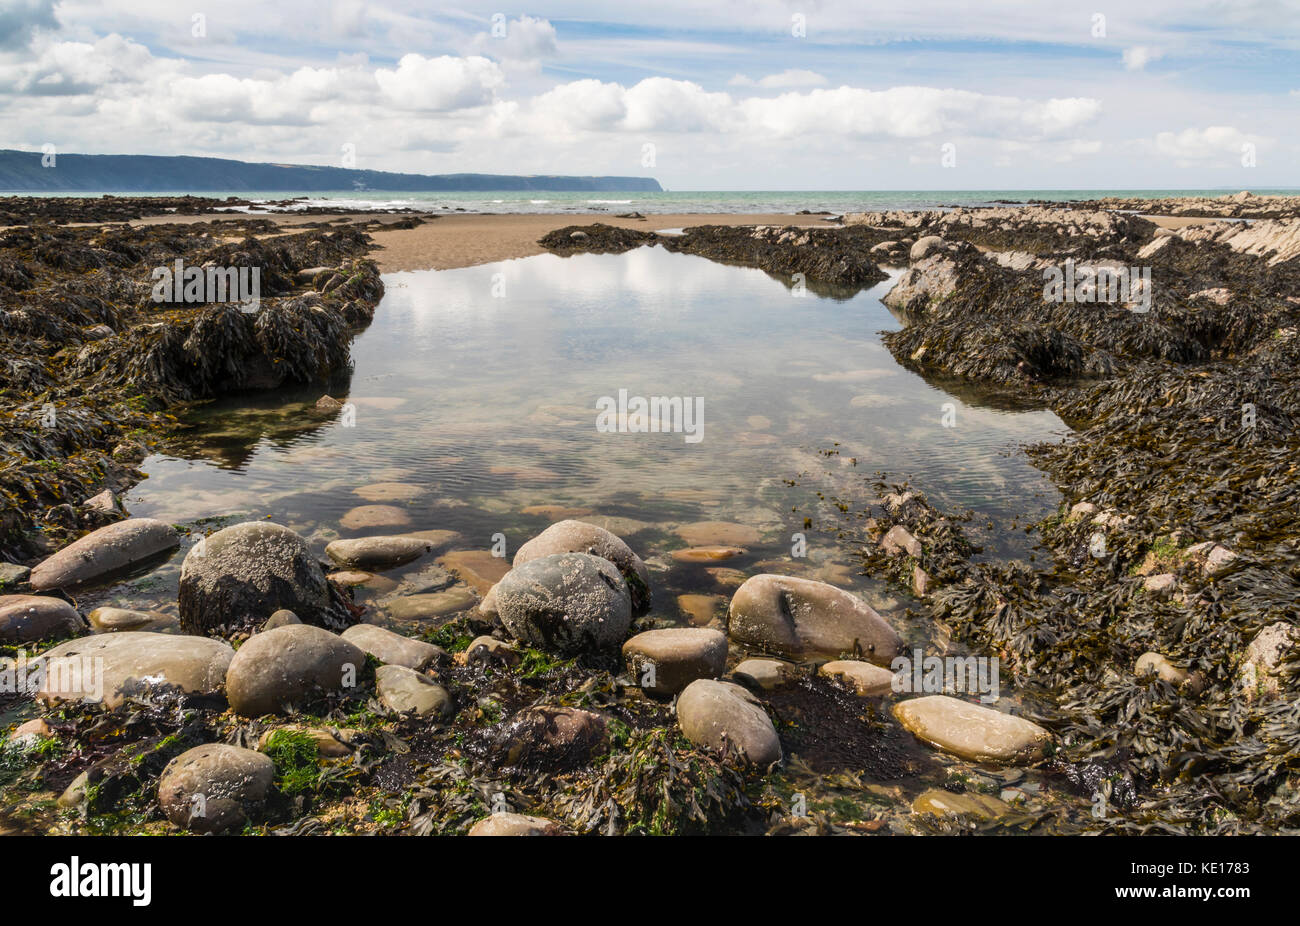 Rock Pool View: Colourful detail of a Rock Pool at Low Tide with Distant View of Clovelly and Hartland Point. Babbacombe Cliffs, Near Bucks Mills. Bid Stock Photo